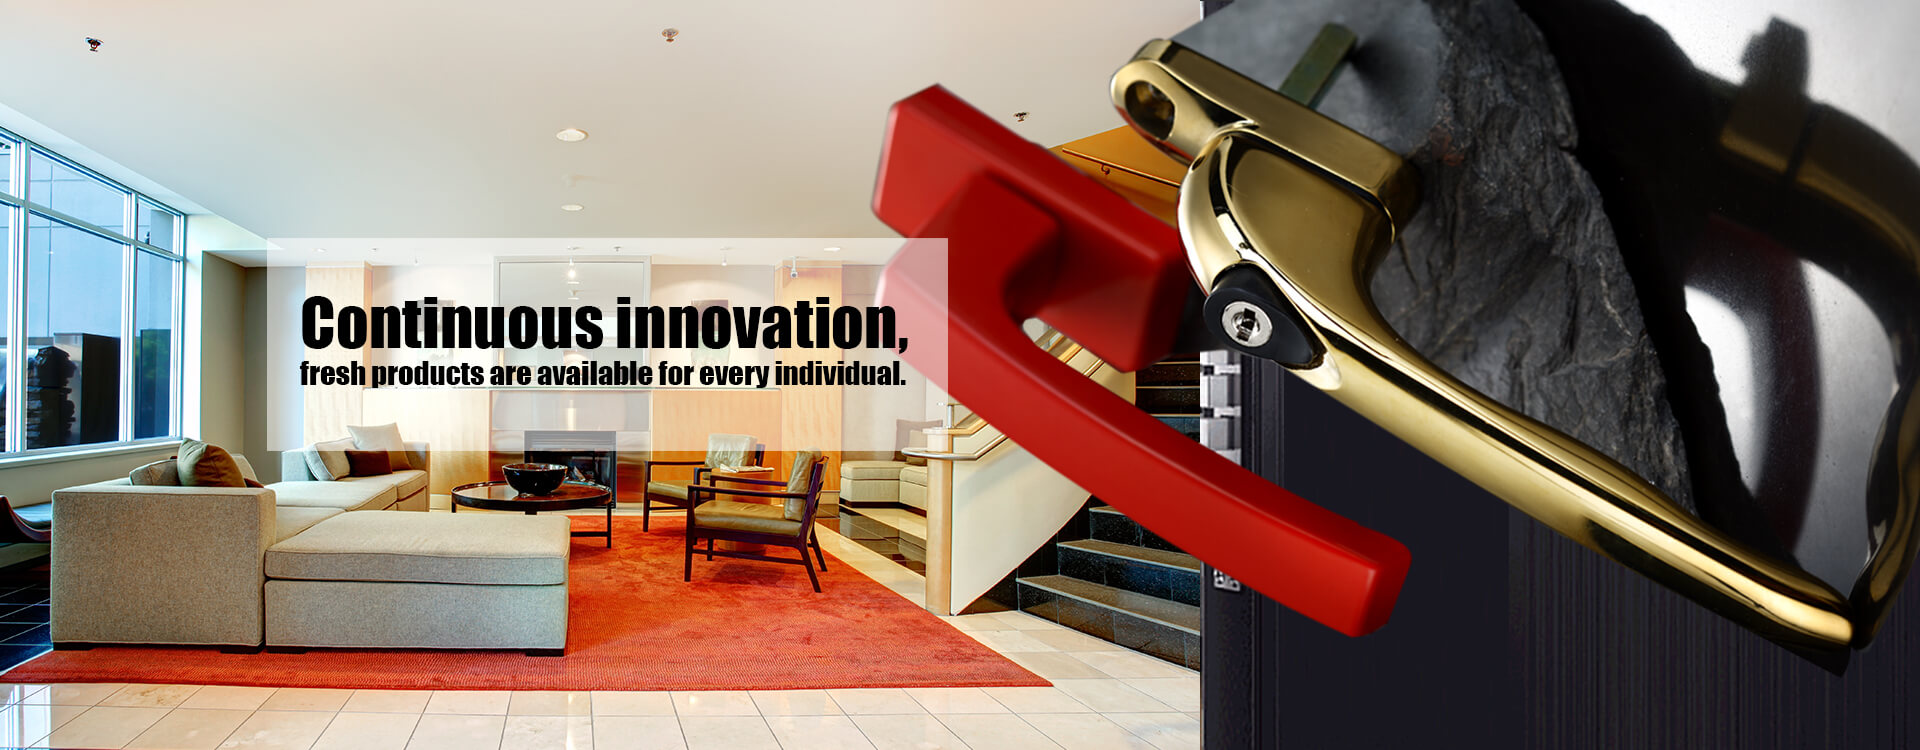 Continuous innovation, Fresh products are available for every individual